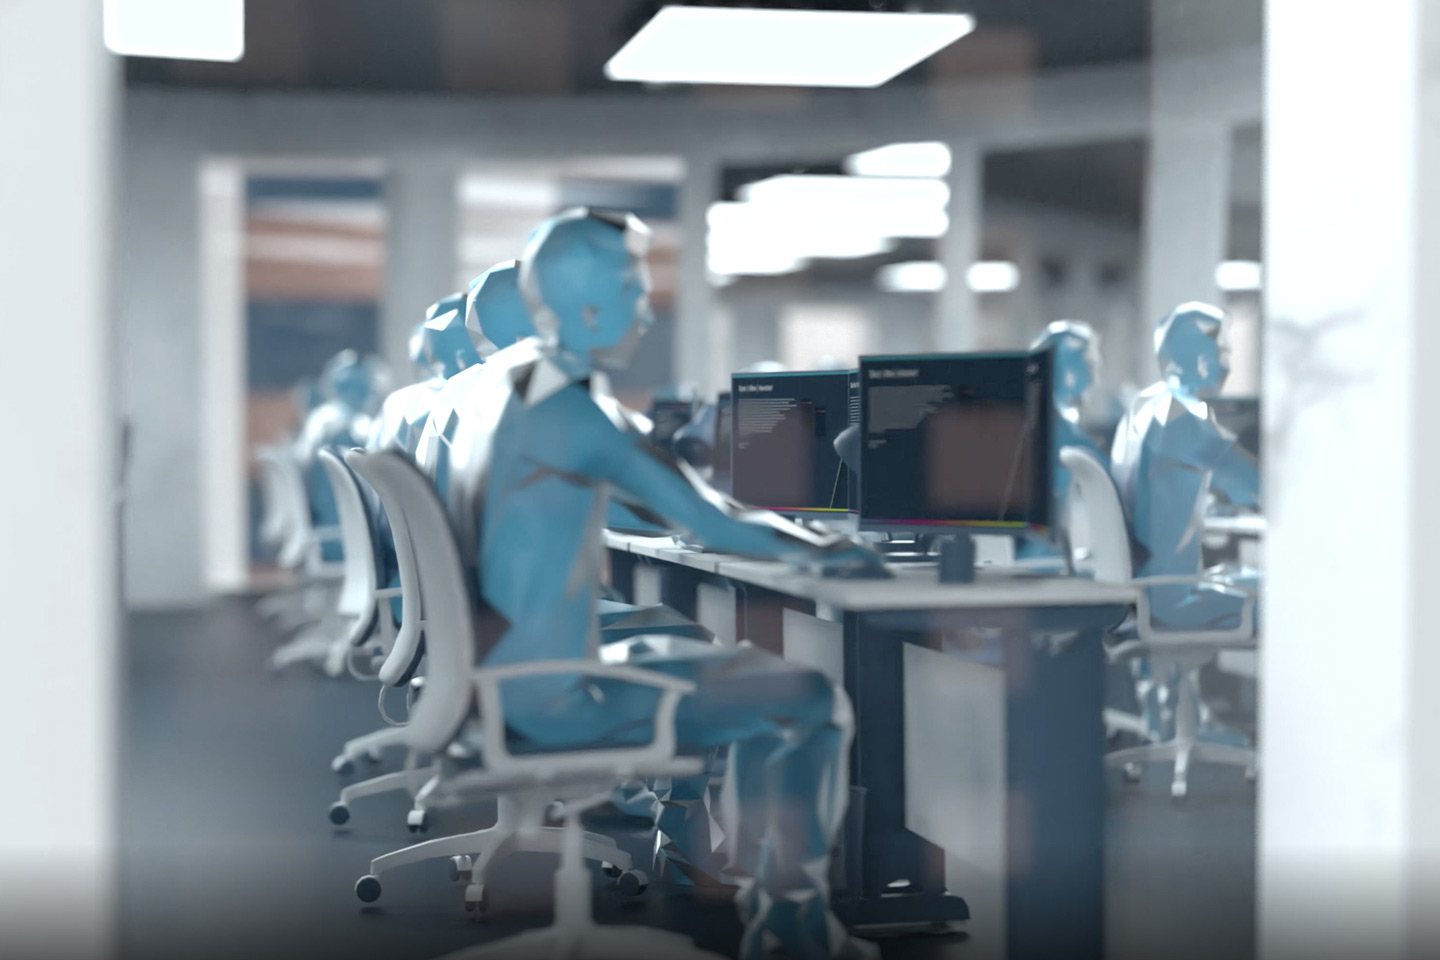 Allegorical representation of Booz Allen's cyber threat hunting analytics as robots at computer stations.